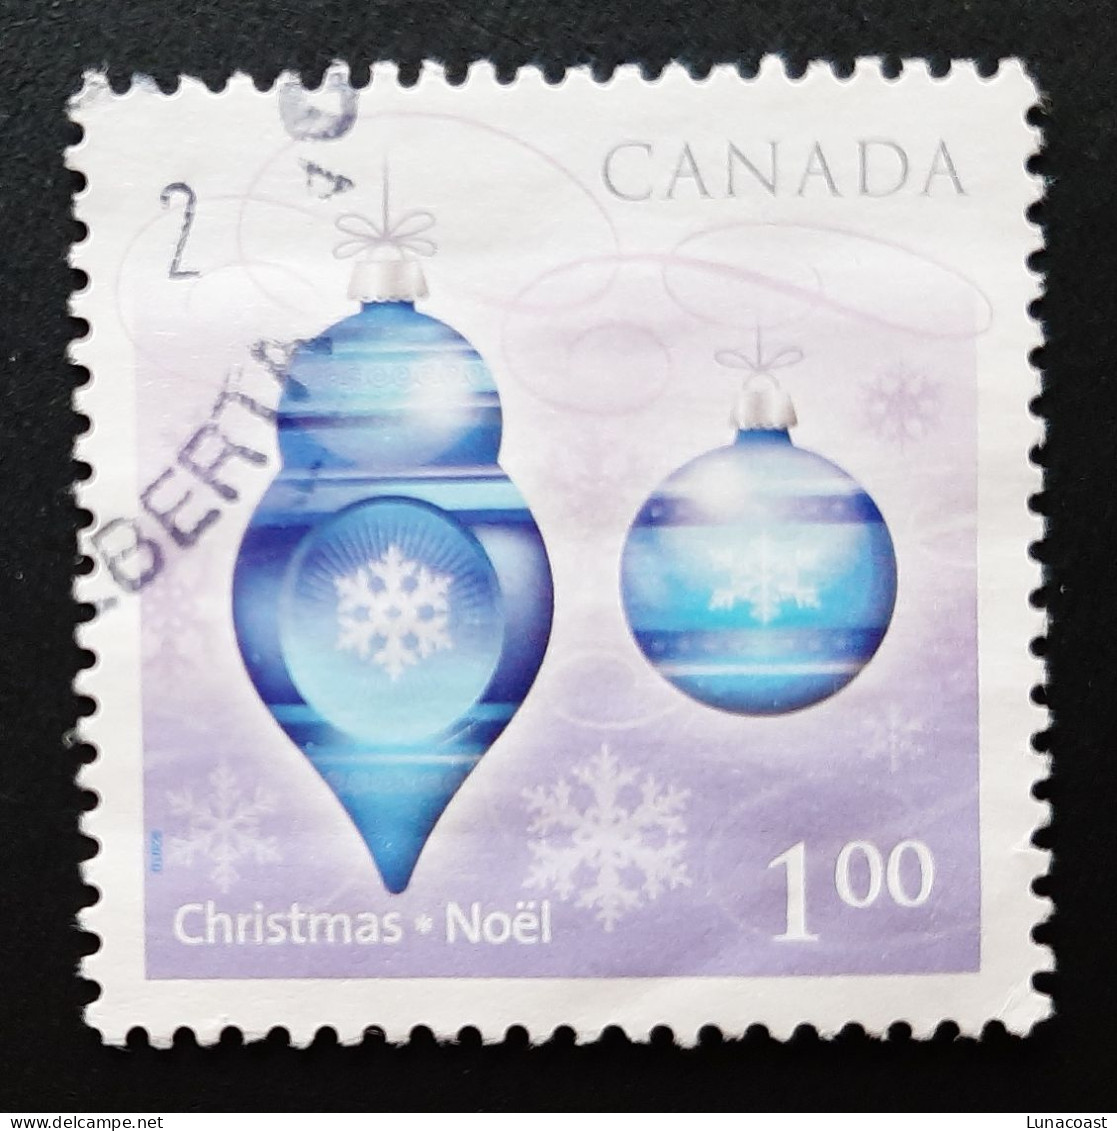 Canada 2010  USED Sc 2411 B   1.00$  Christmas From Souvenir Sheet, Perf.12.5 - Used Stamps